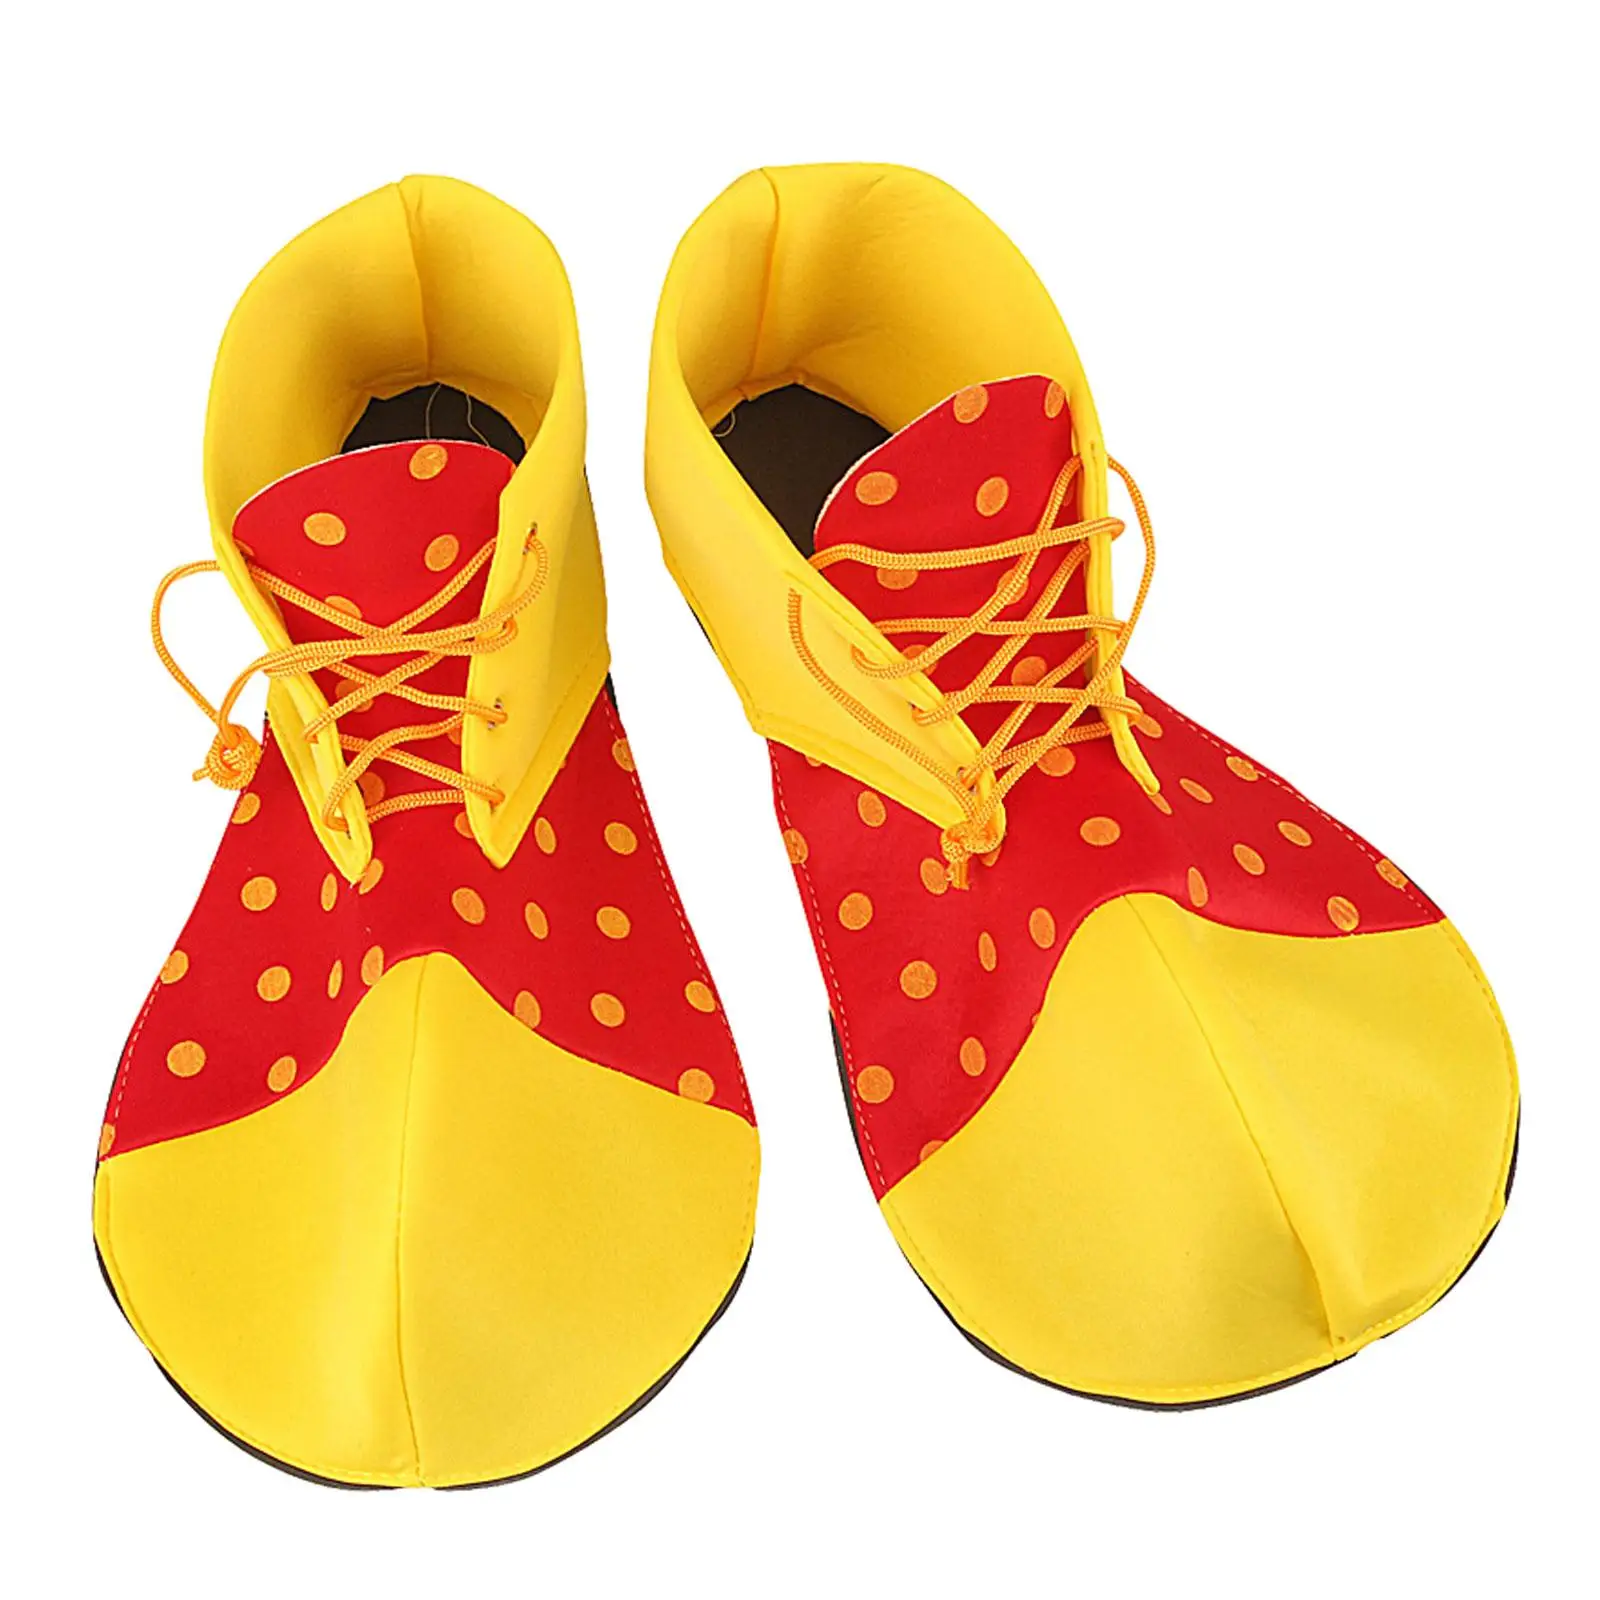 Adult Clown Shoes Dress up Adults Costume Accessories Cute Decorations Novelty Gift Rainbows Shoes Christmas Party Costume